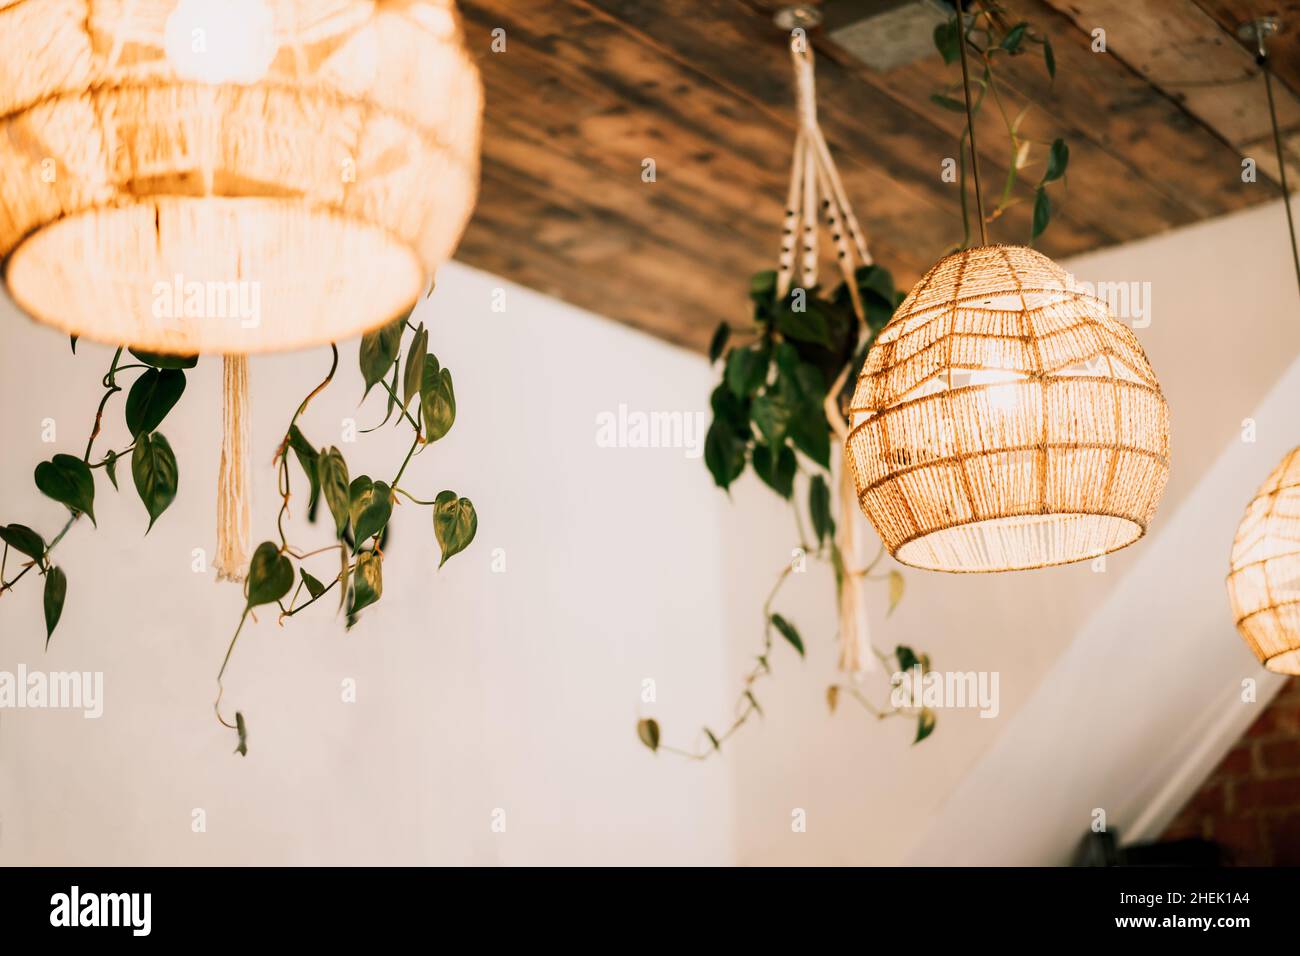 Wicker handmade chandelier lamps on the wooden ceiling, hanging flower pots with green plants on the white wall background. Eco natural trendy style. Stock Photo